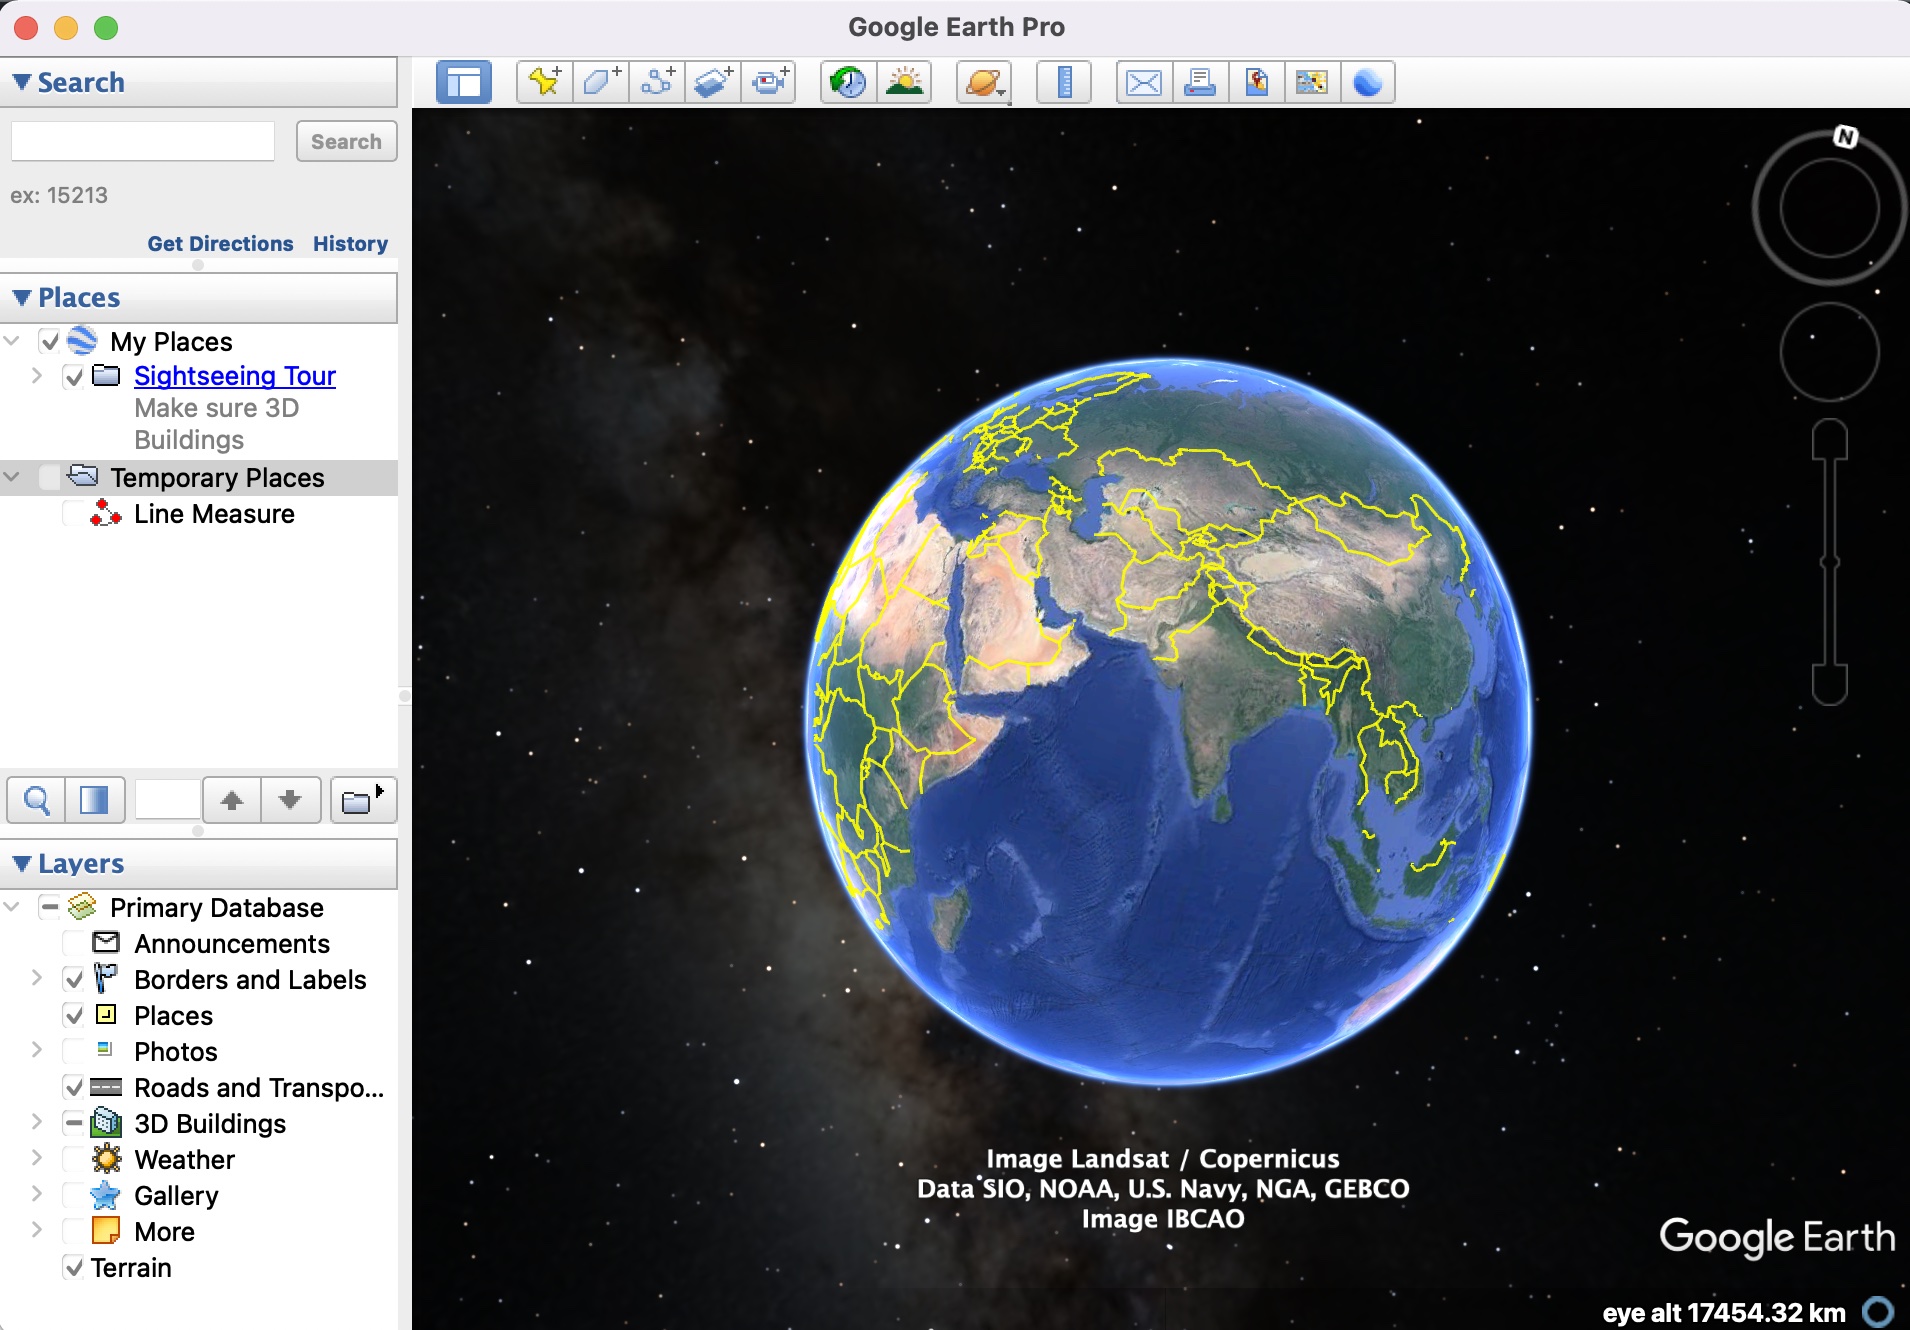 How to draw a line on Google Earth